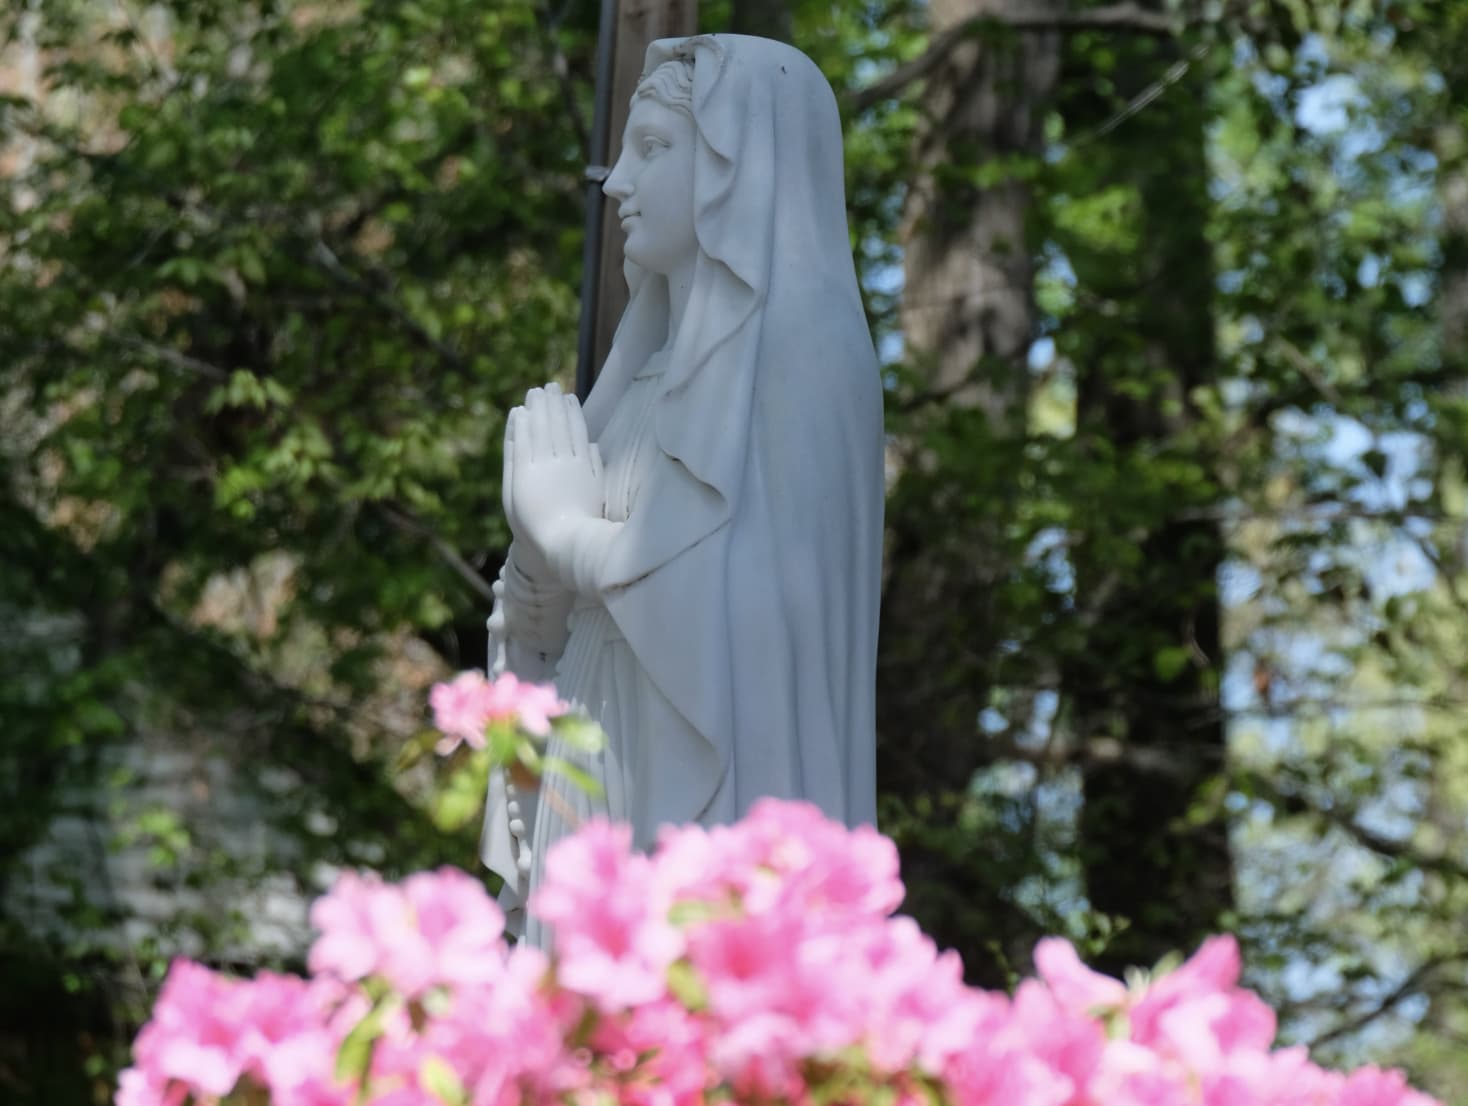 Statue of Virgin Mary with Flowers - Catholic Stock Photo